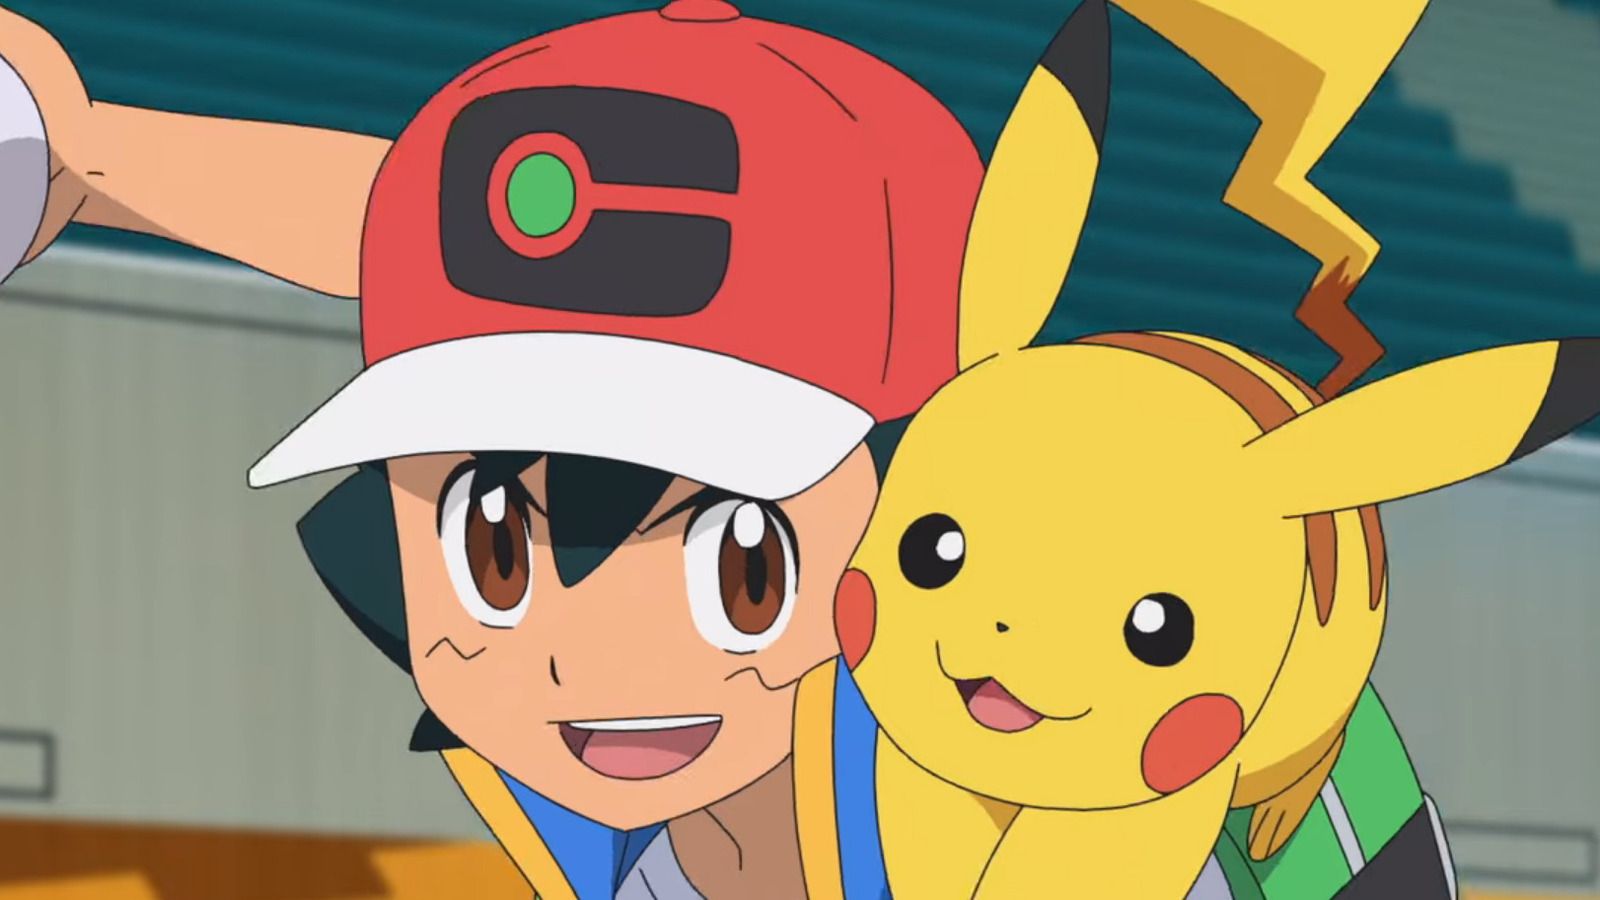 Theories About Why Ash Doesn’t Age Ash and Pikachu